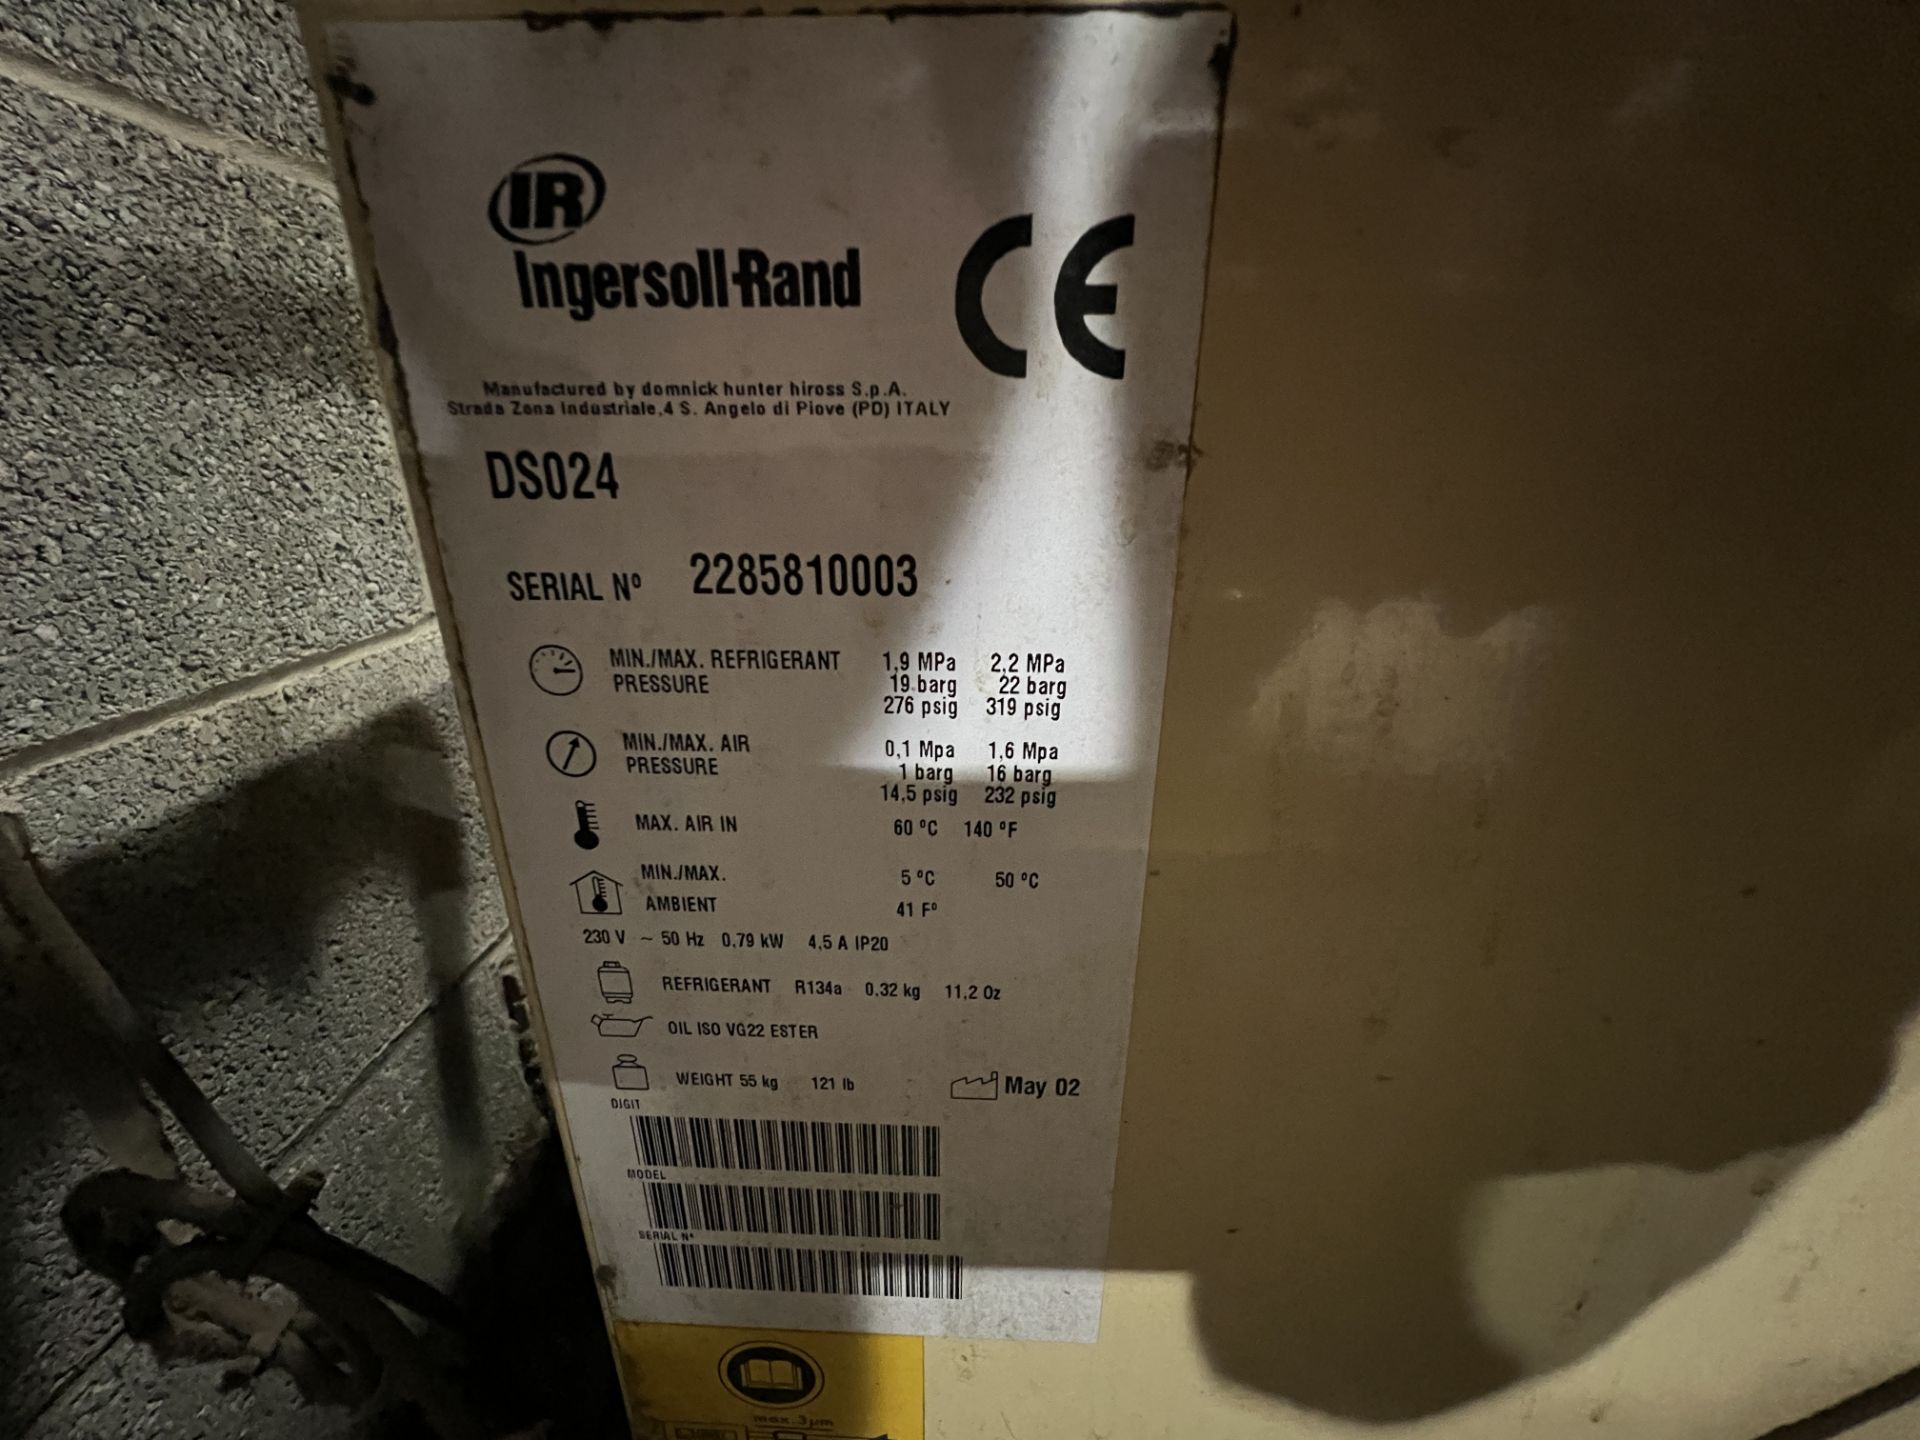 Radnal Pneumatics 340 Lts welded vertical air receiver tank with Ingersoll Rand DS024 air dryer , - Image 6 of 7